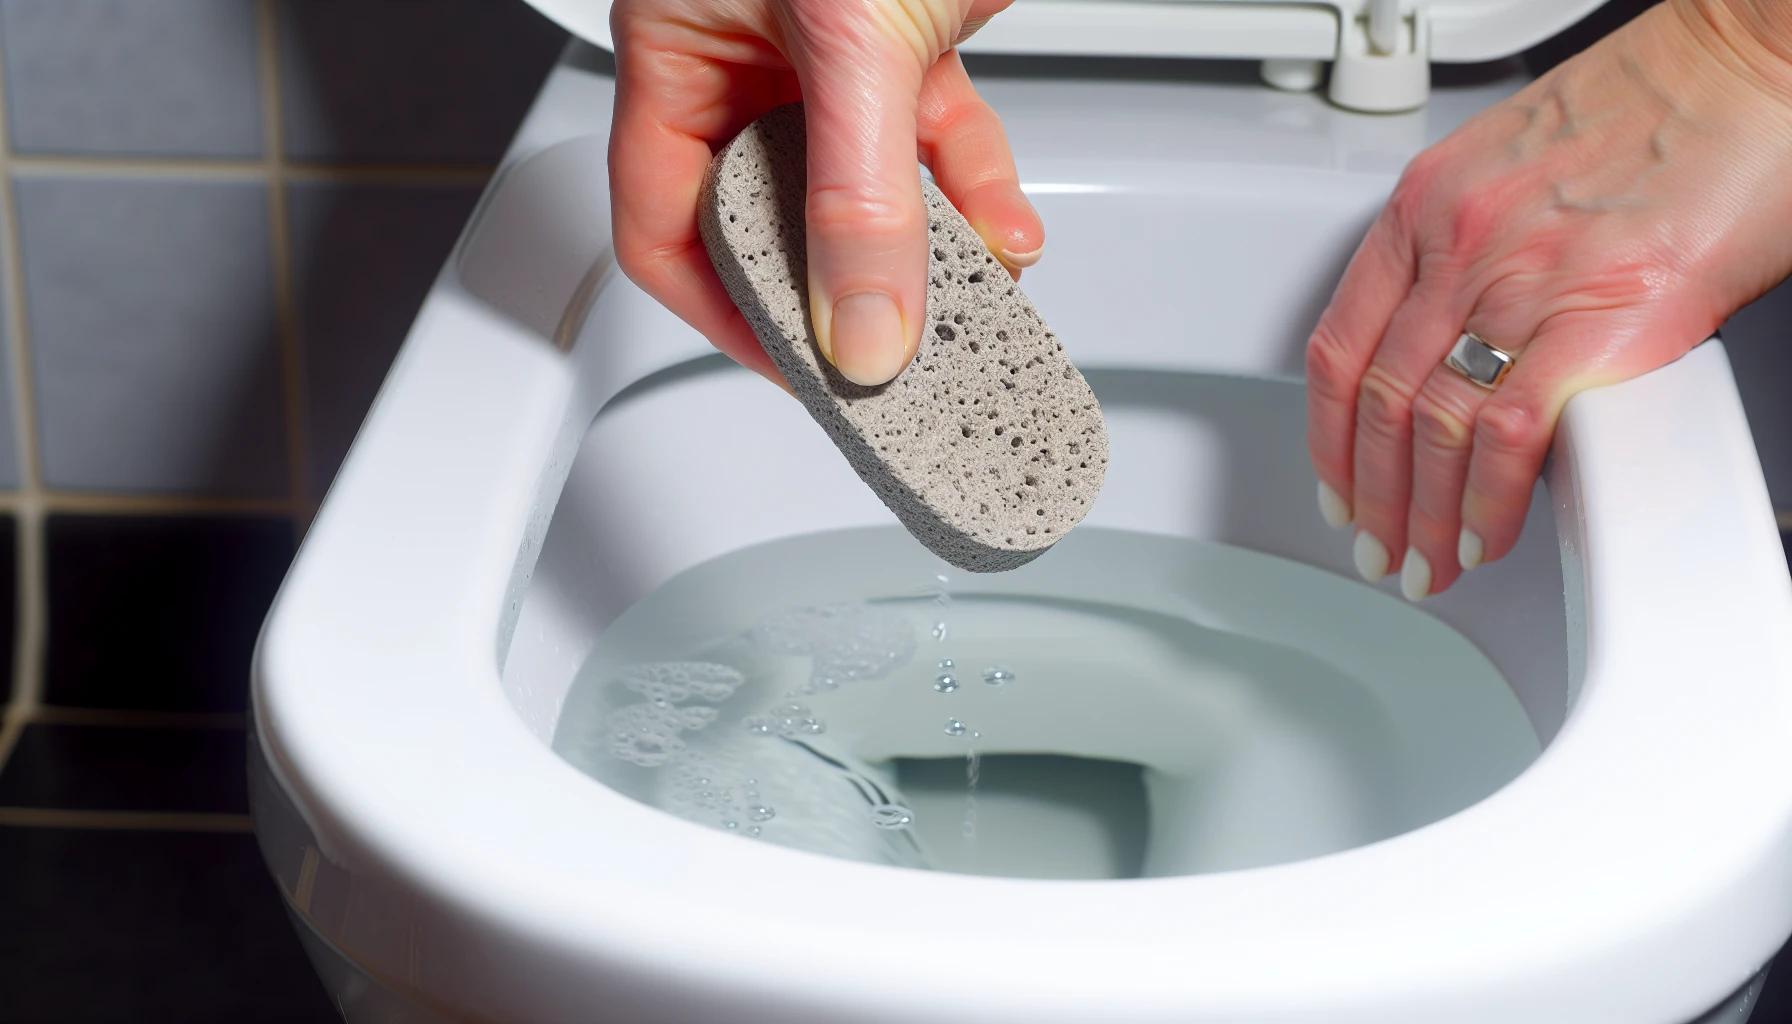 Pumice stone for gentle removal of hard water stains